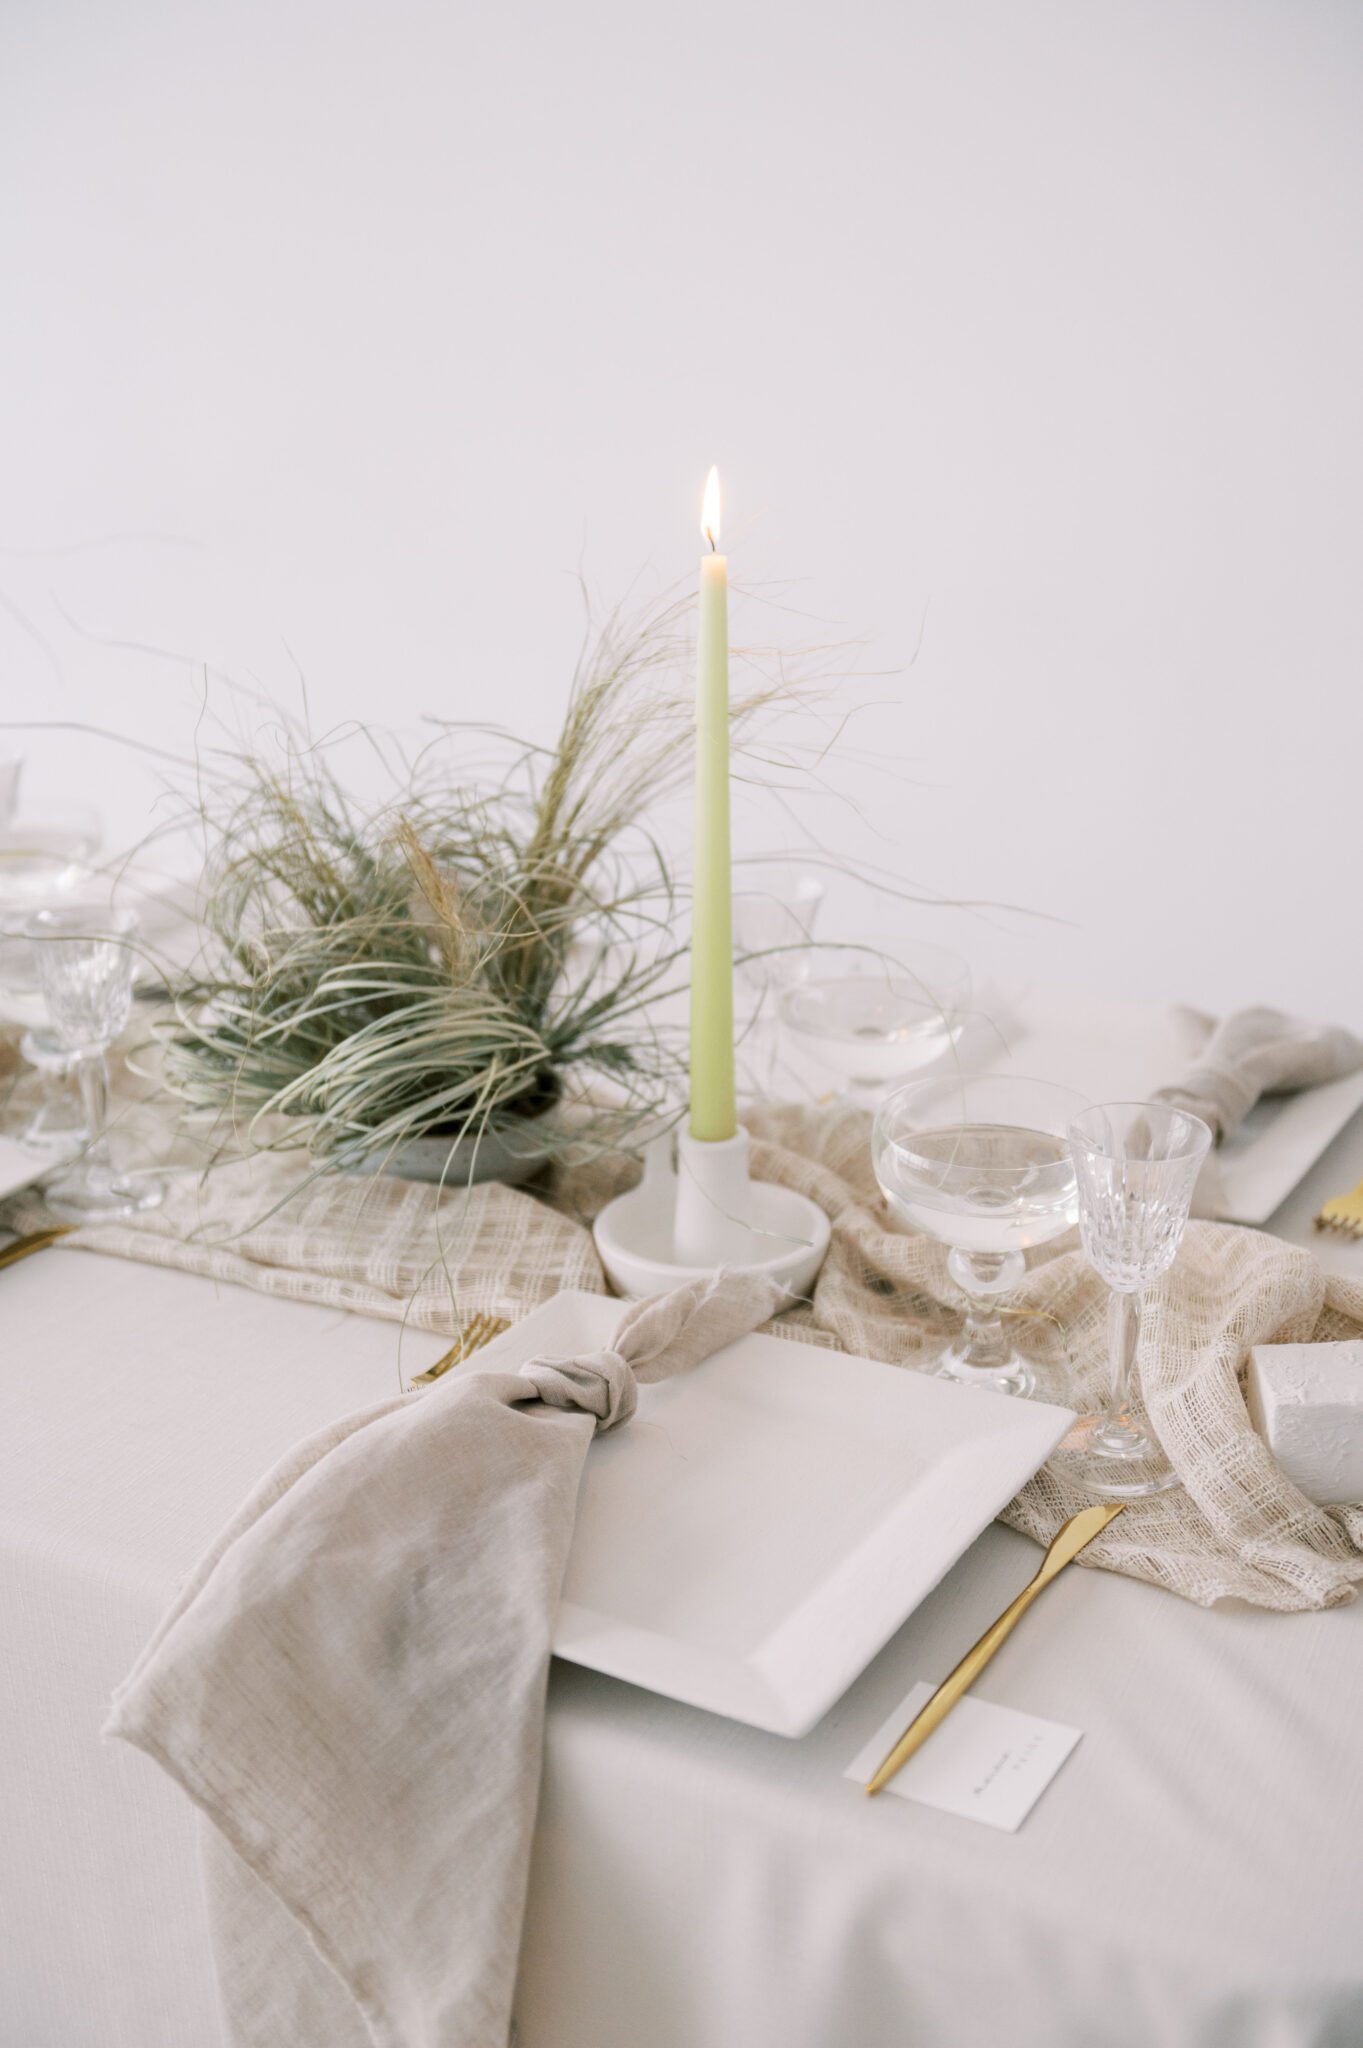 nature-inspired textures in table linens, grass centrepieces featuring white and beige table scape